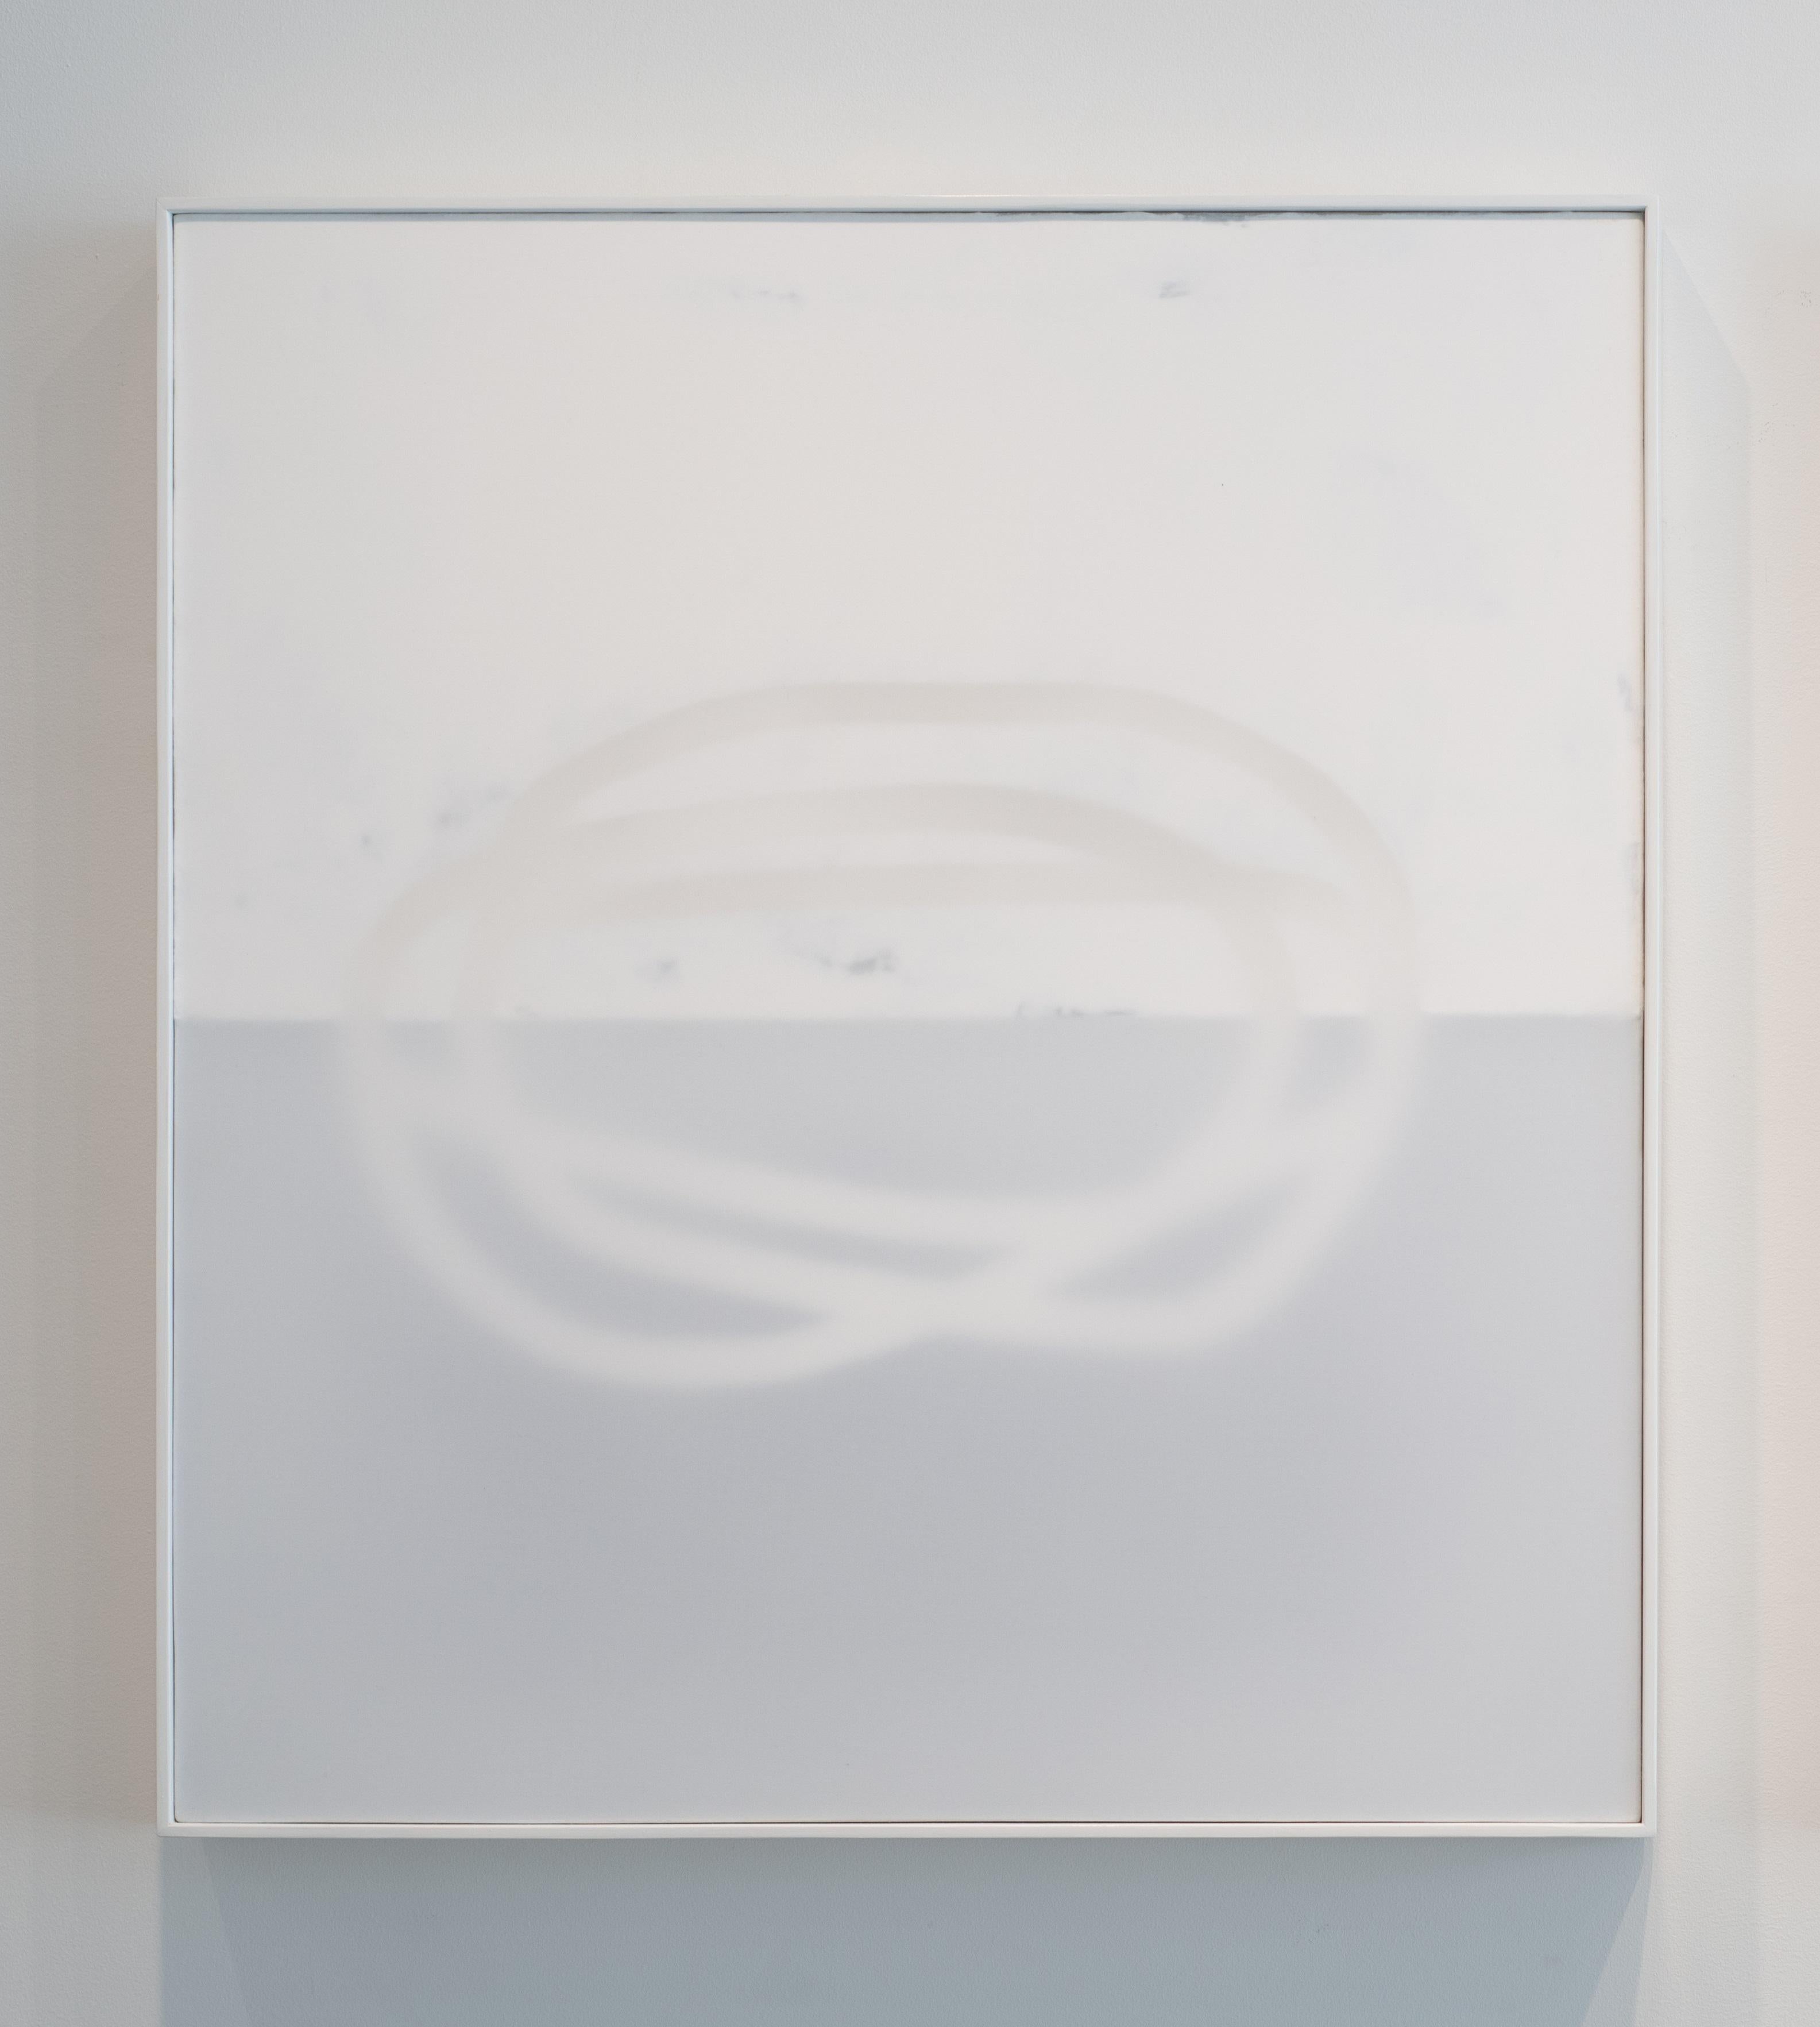 Drive 6, 2022
Mixed media on canvas
36 x 33 inches
91.4 x 83.8 cm

Udo Nöger creates luminous monochrome paintings that capture light, movement and energy expressed in highly minimalistic compositions. Nöger, who grew up in Enger, a town in